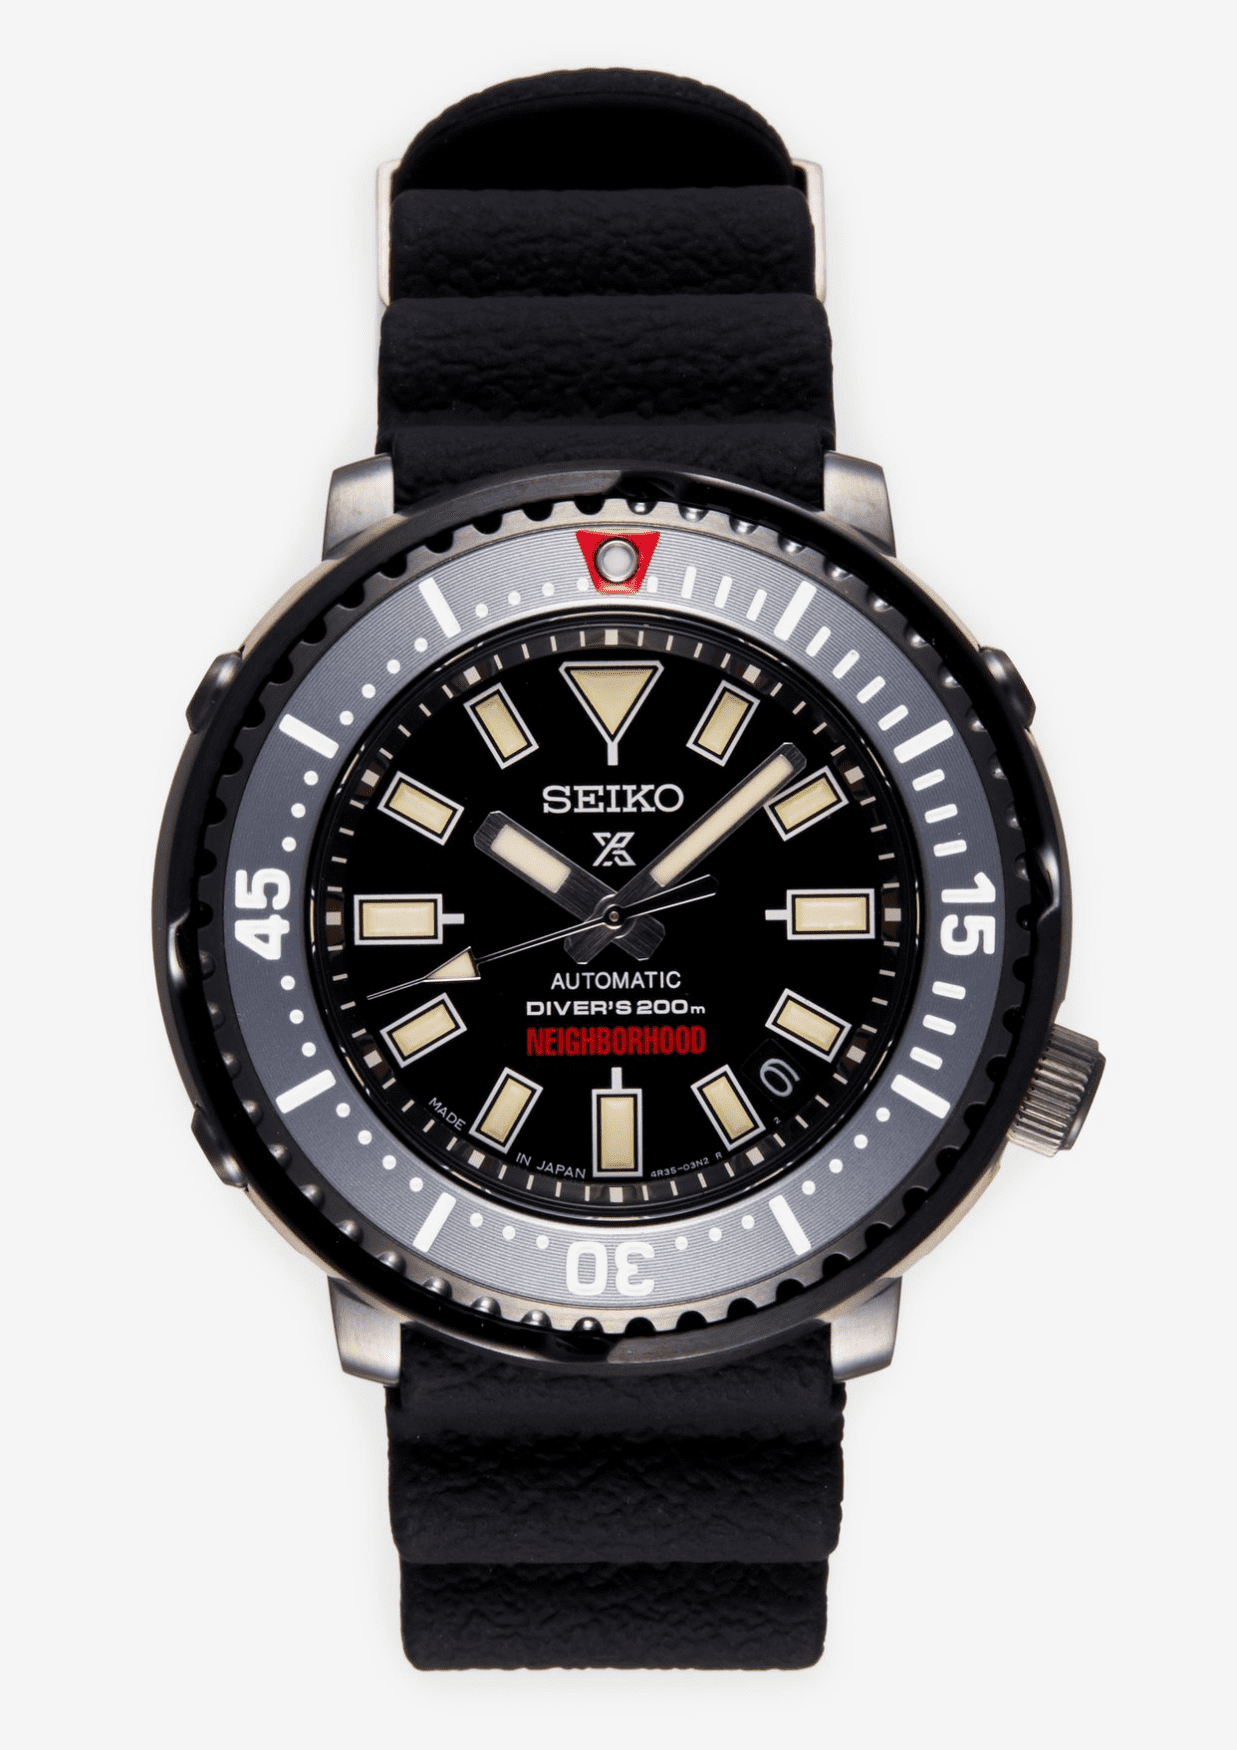 The Seiko x Neighborhood dive watch is awesome. Here are 5 watches that (maybe) inspired it including Tudor, Rolex and more